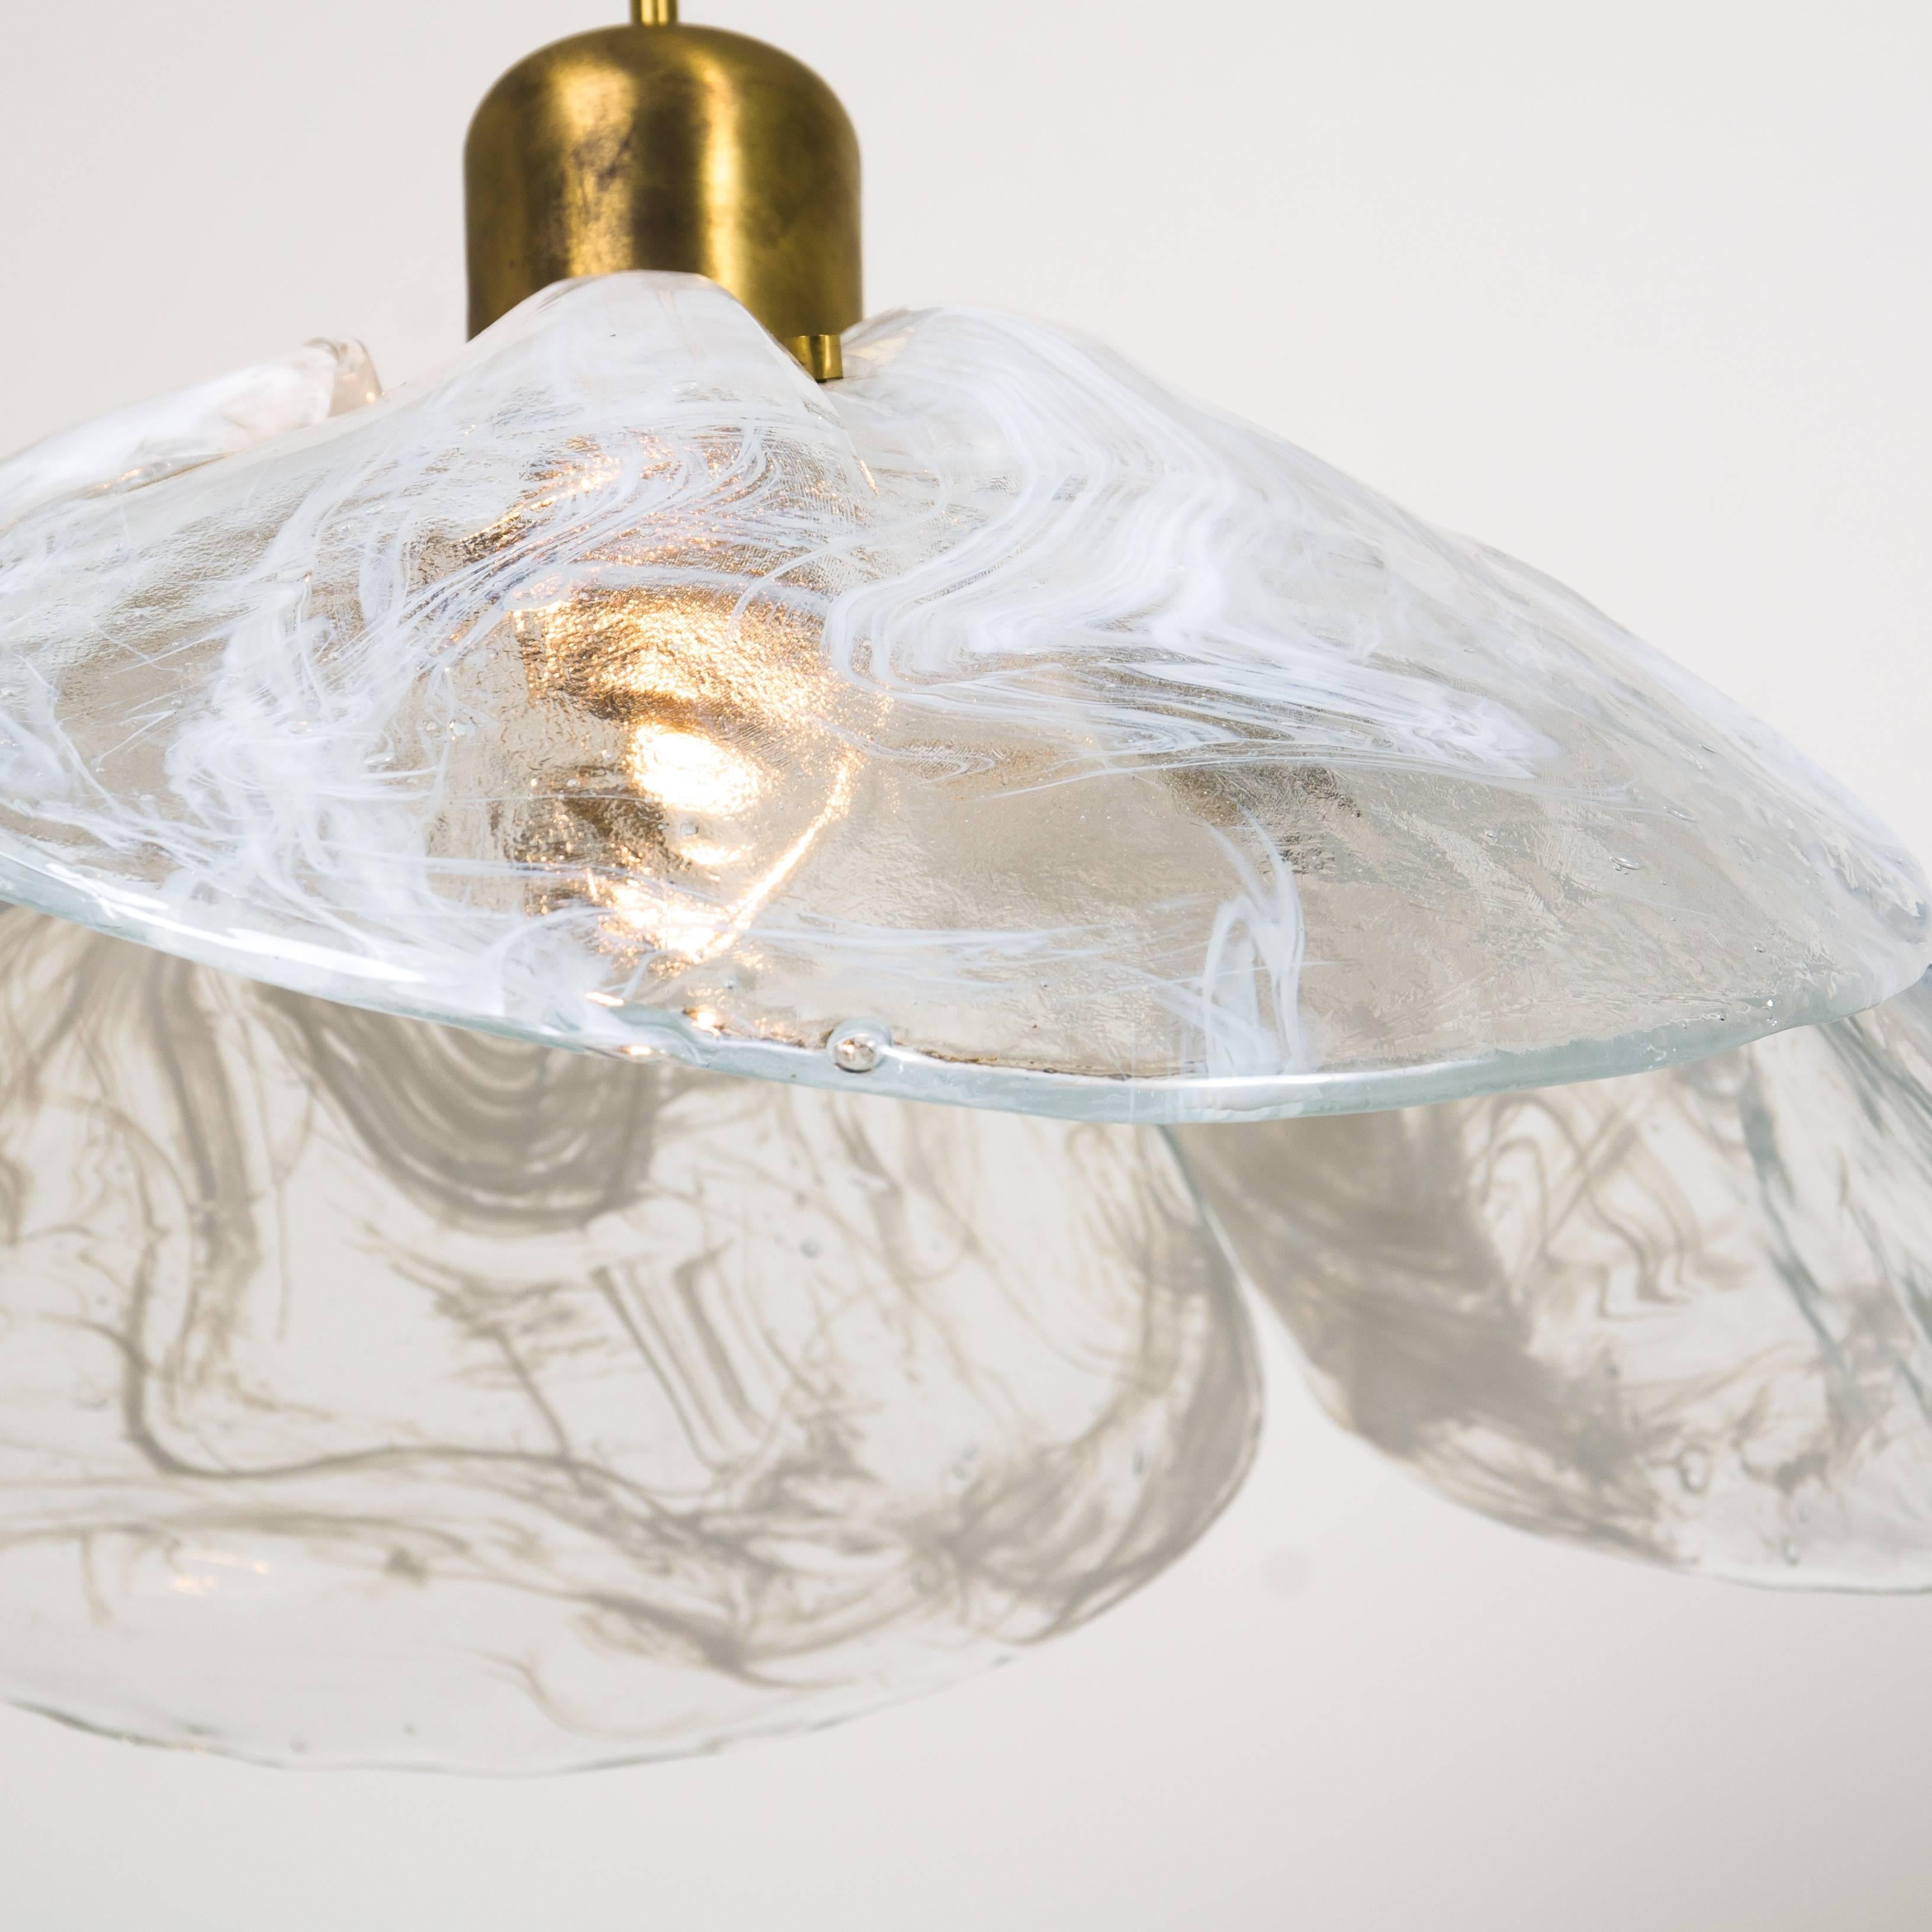 Two beautiful high quality midcentury brass chandeliers with four melting glass panels in the shape of a flower. Designed and executed by Kalmar Vienna in the 1970s. Made of hand blown melting clear and white glass.

Cleaned and well-wired, in